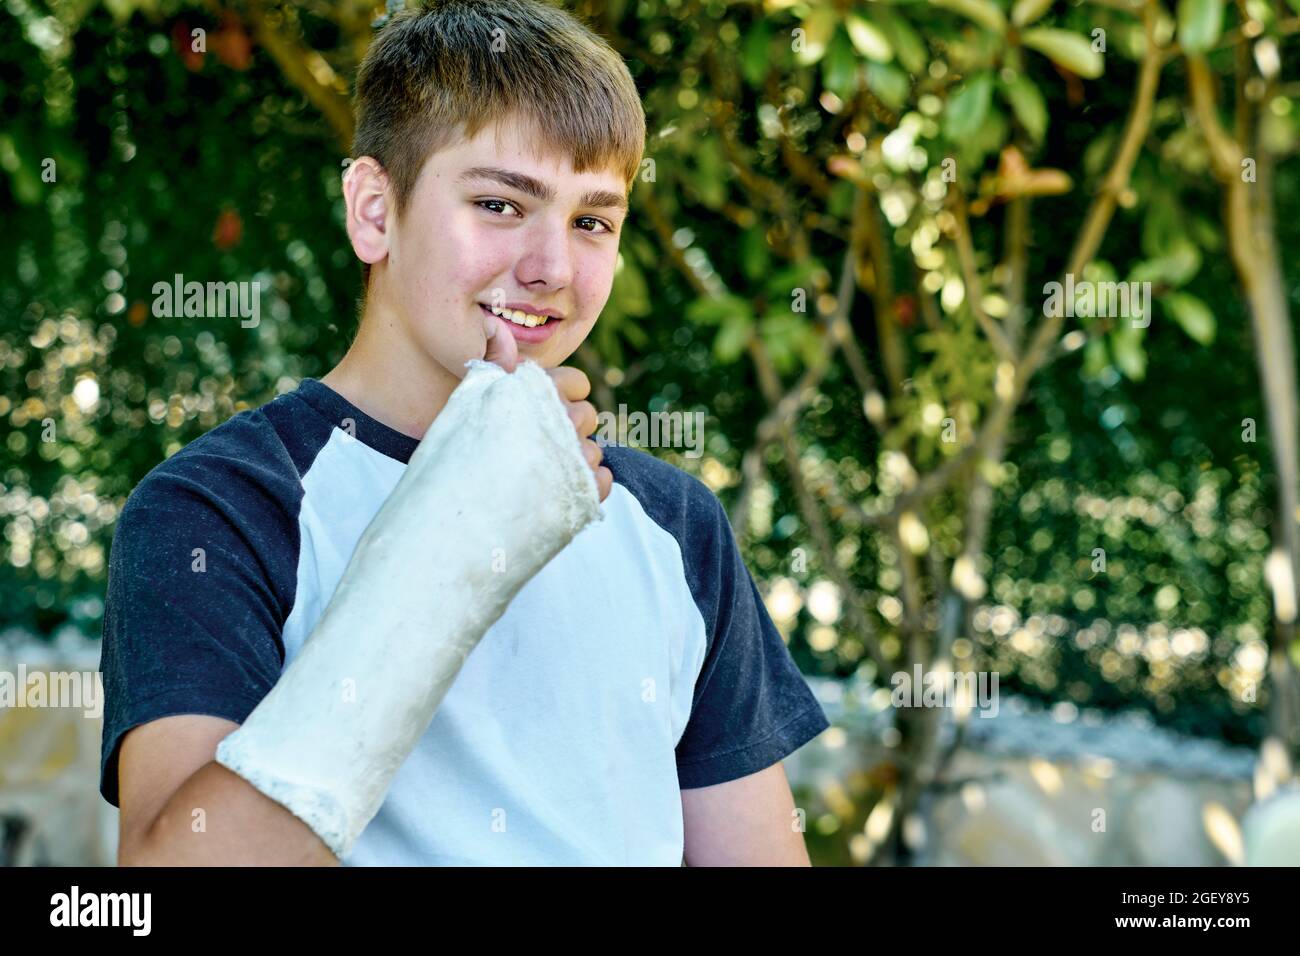 Portrait of young caucasian boy with a broken and cast arm sitting in a chair outdoor in a garden. Lifestyle concept. Stock Photo